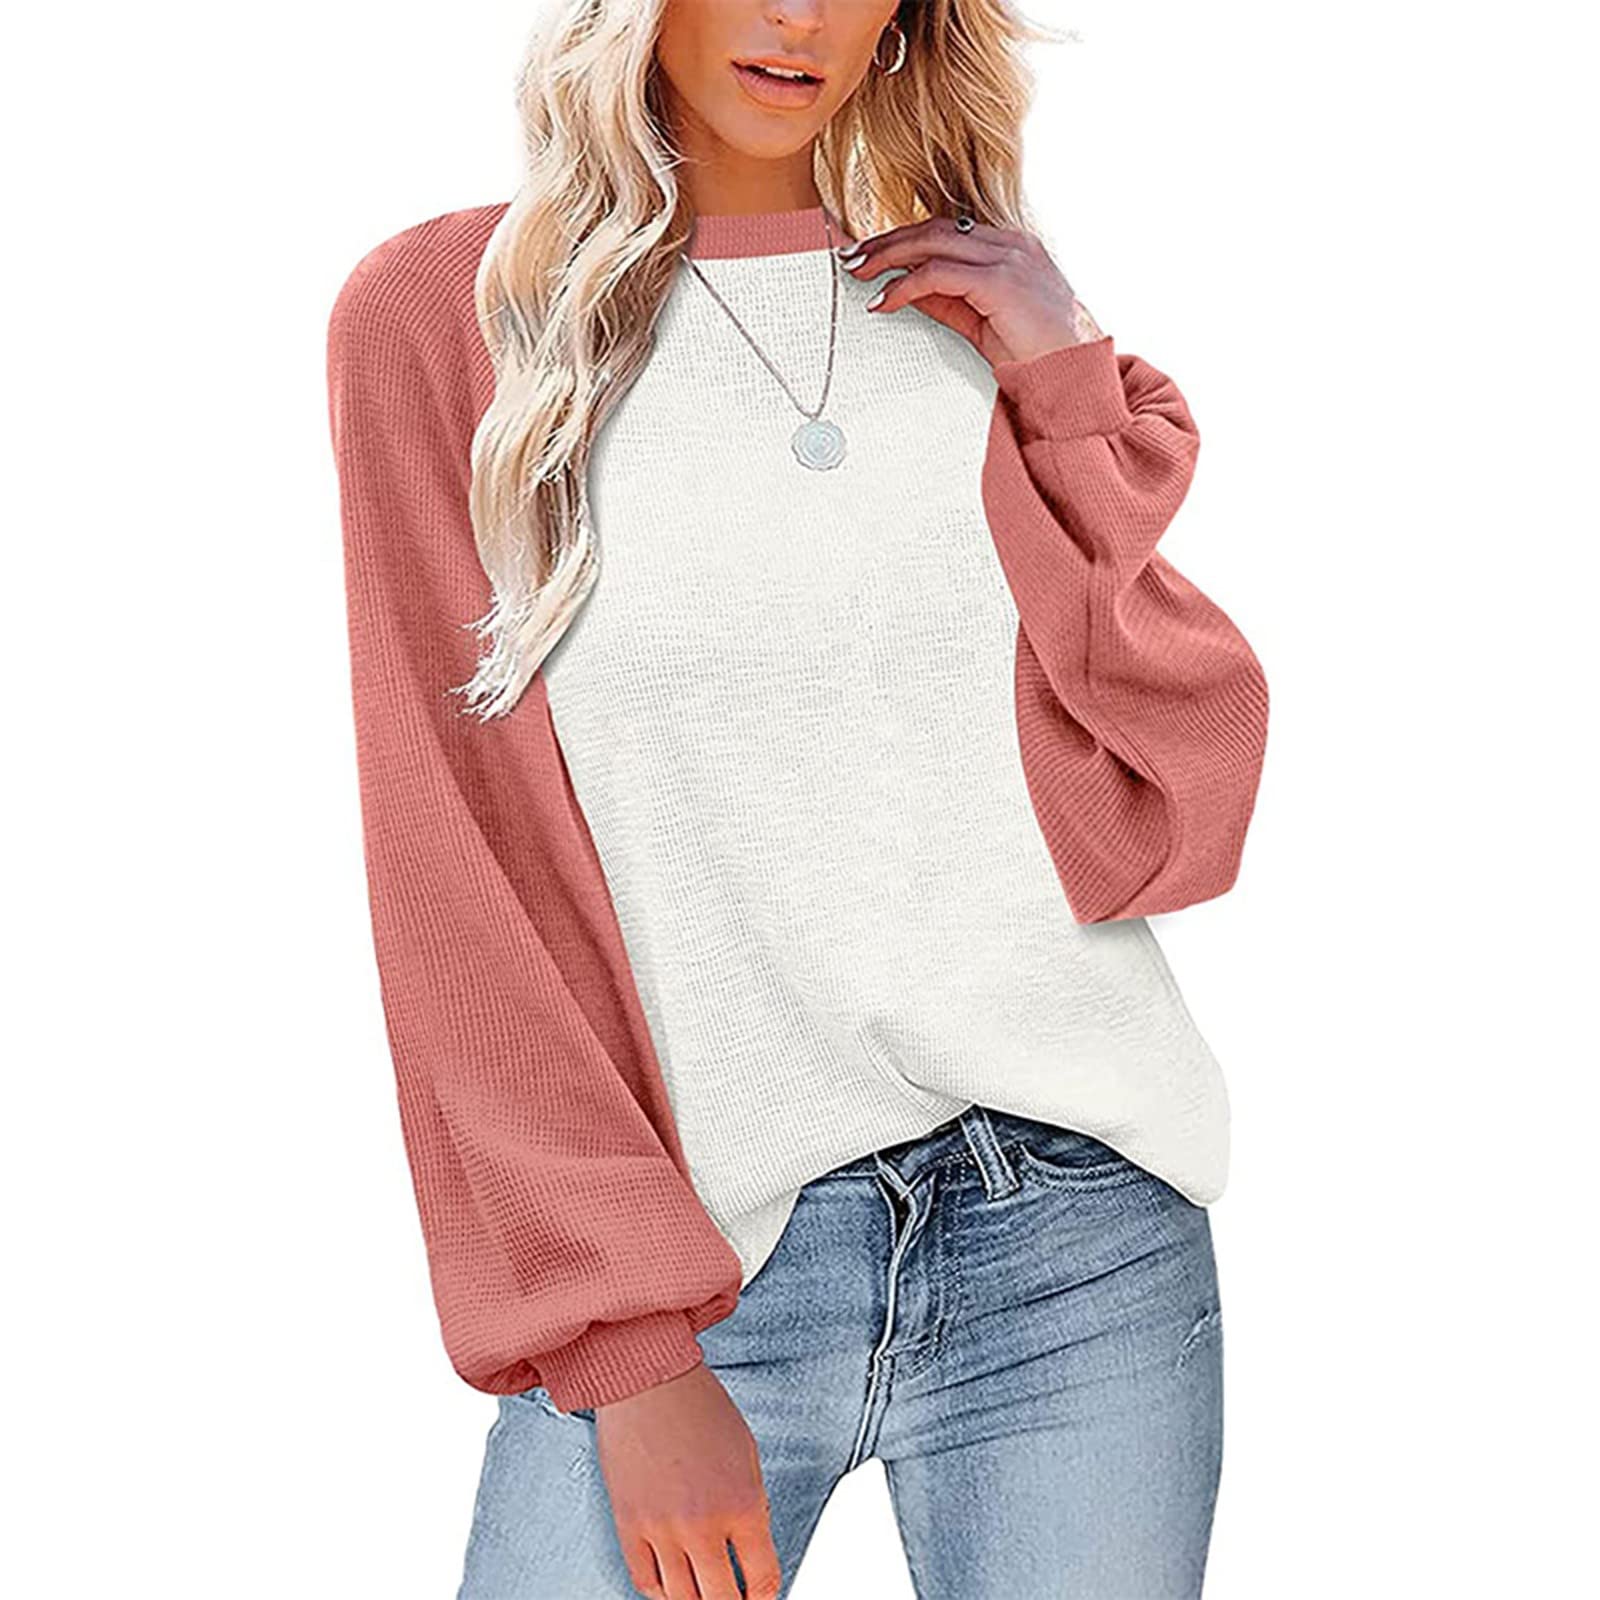 CHARMAP- Pullover Sweaters for Women Women's Round Neck Lantern Sleeve Contrast Color Pullover Casual Bottomed Shirt Top